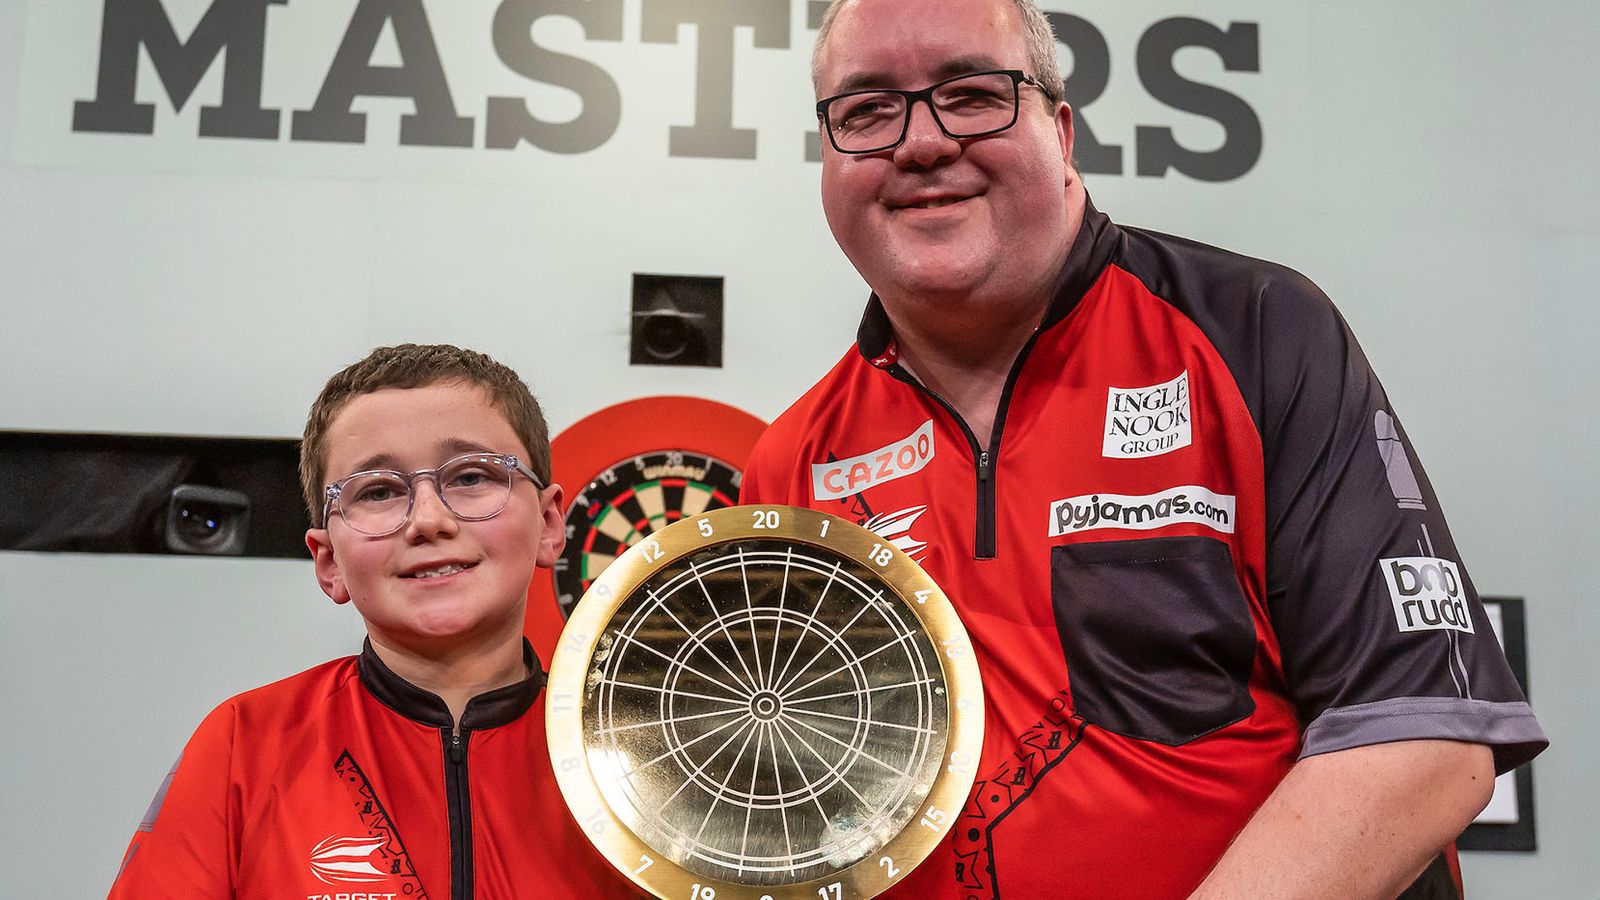 Cazoo Darts Masters: Stephen Bunting beats Michael van Gerwen to win first televised PDC title | Darts News